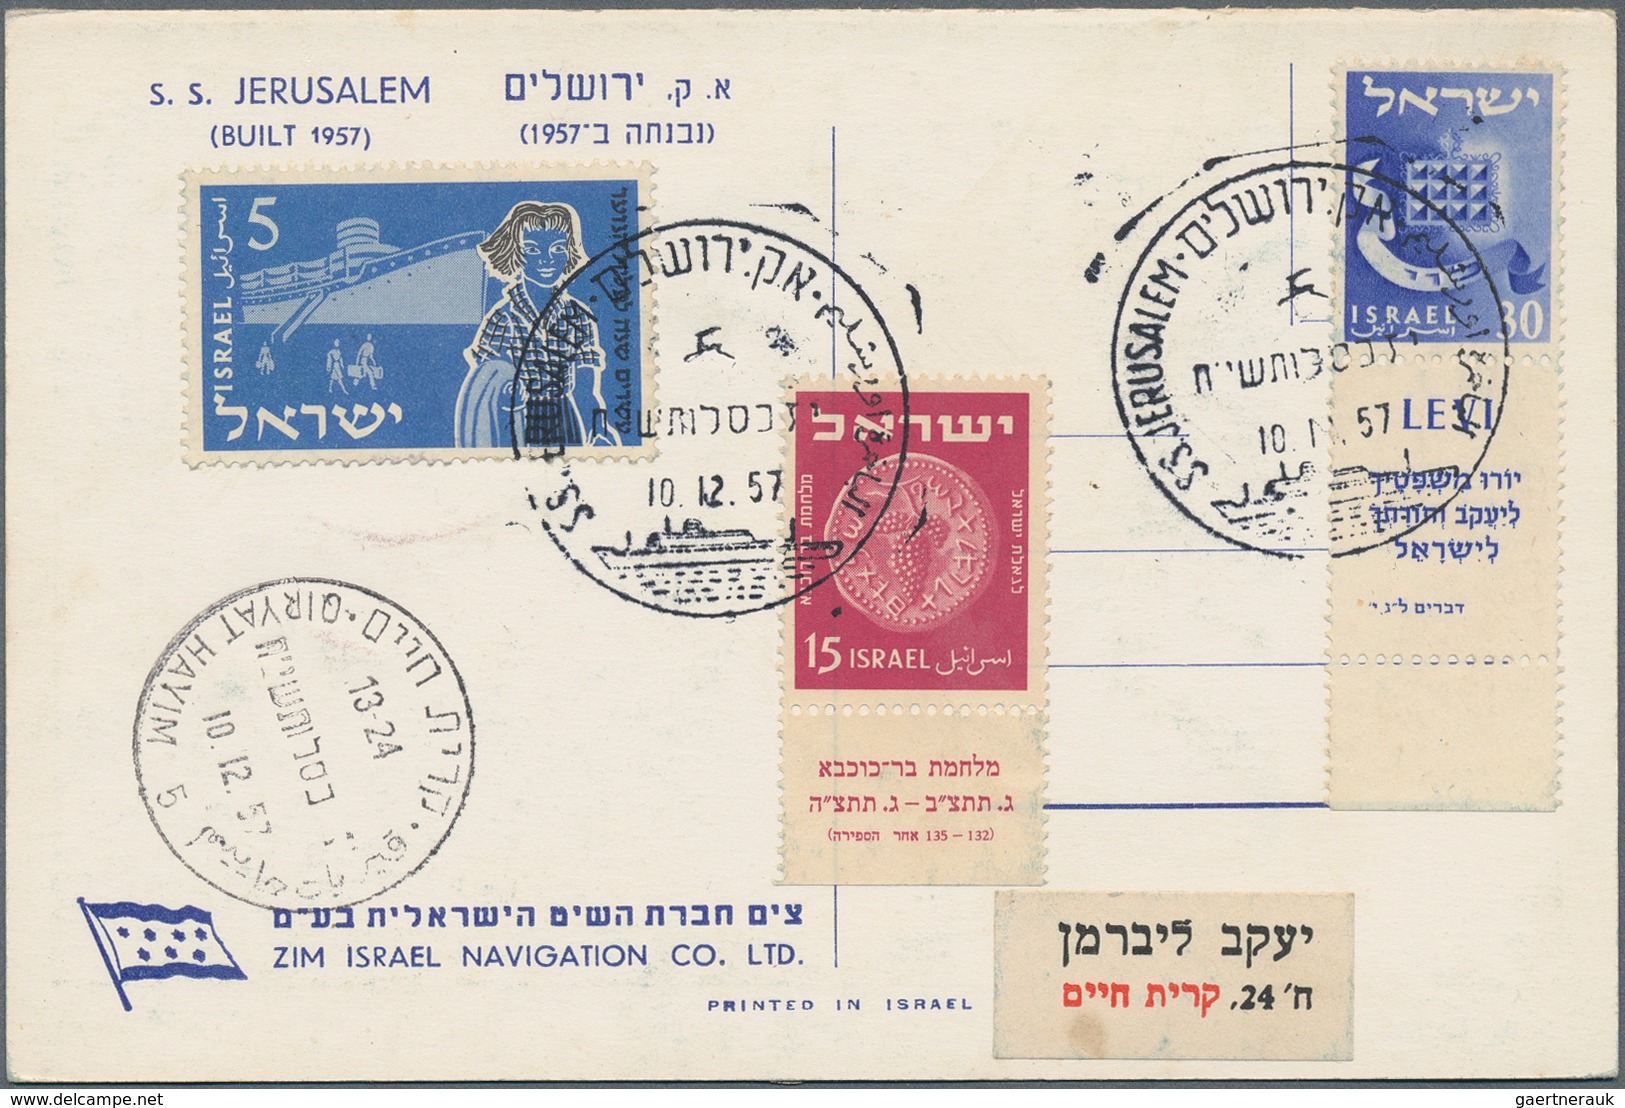 Israel: 1948/1970 (ca.), accumulation of apprx. 230 covers/cards, comprising commercial and philatel